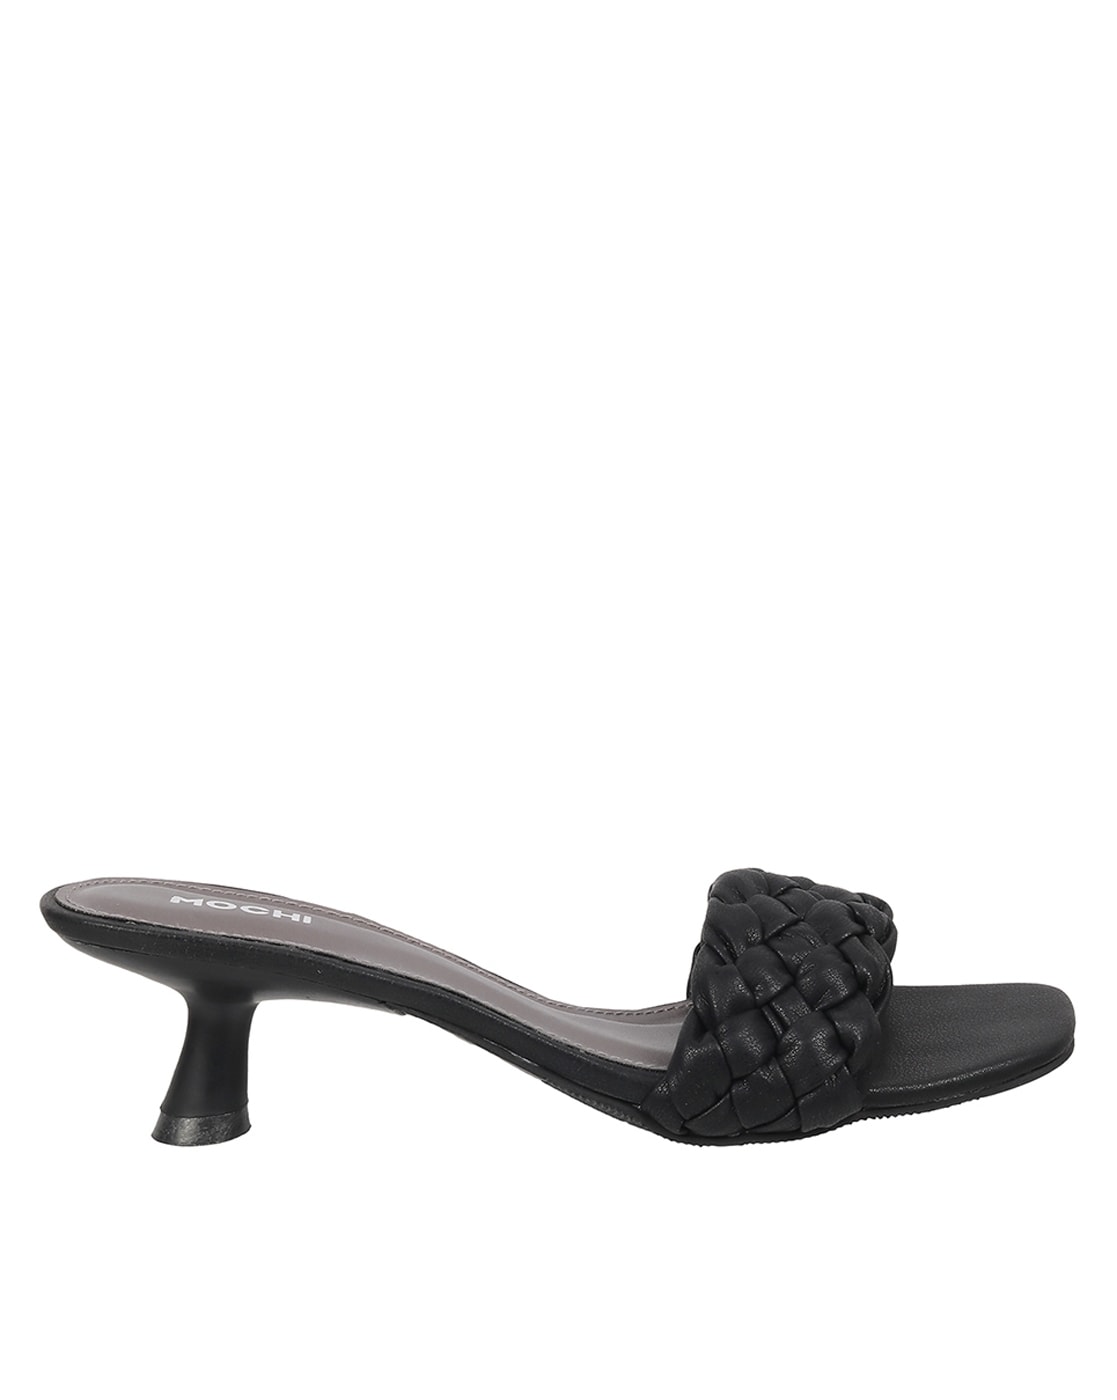 Mochi Black Wedges Heels - Buy Mochi Black Wedges Heels Online at Best  Prices in India on Snapdeal